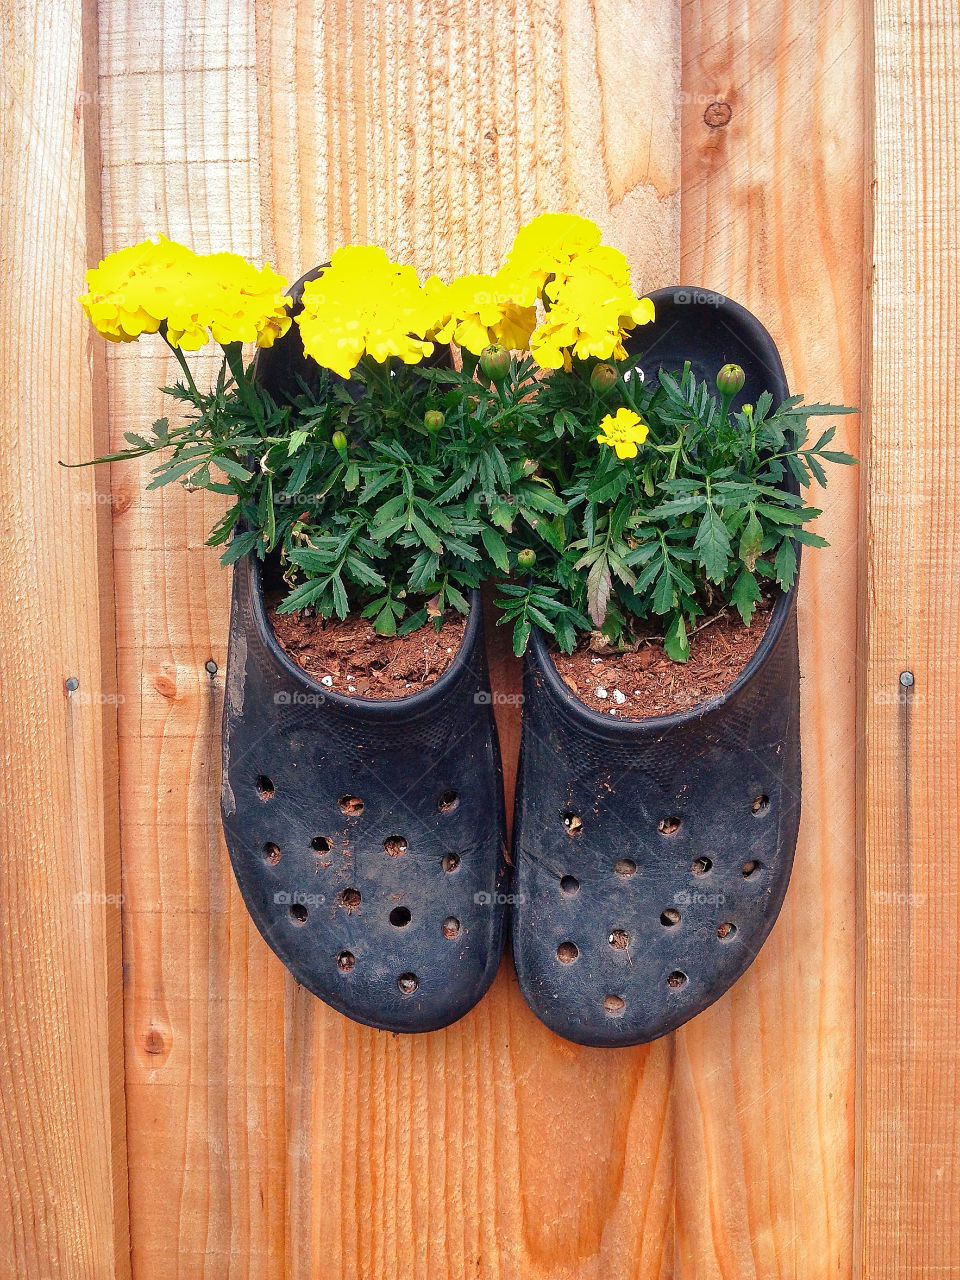 Yellow marigolds bloom in recycled repurposed black rubber Crocs